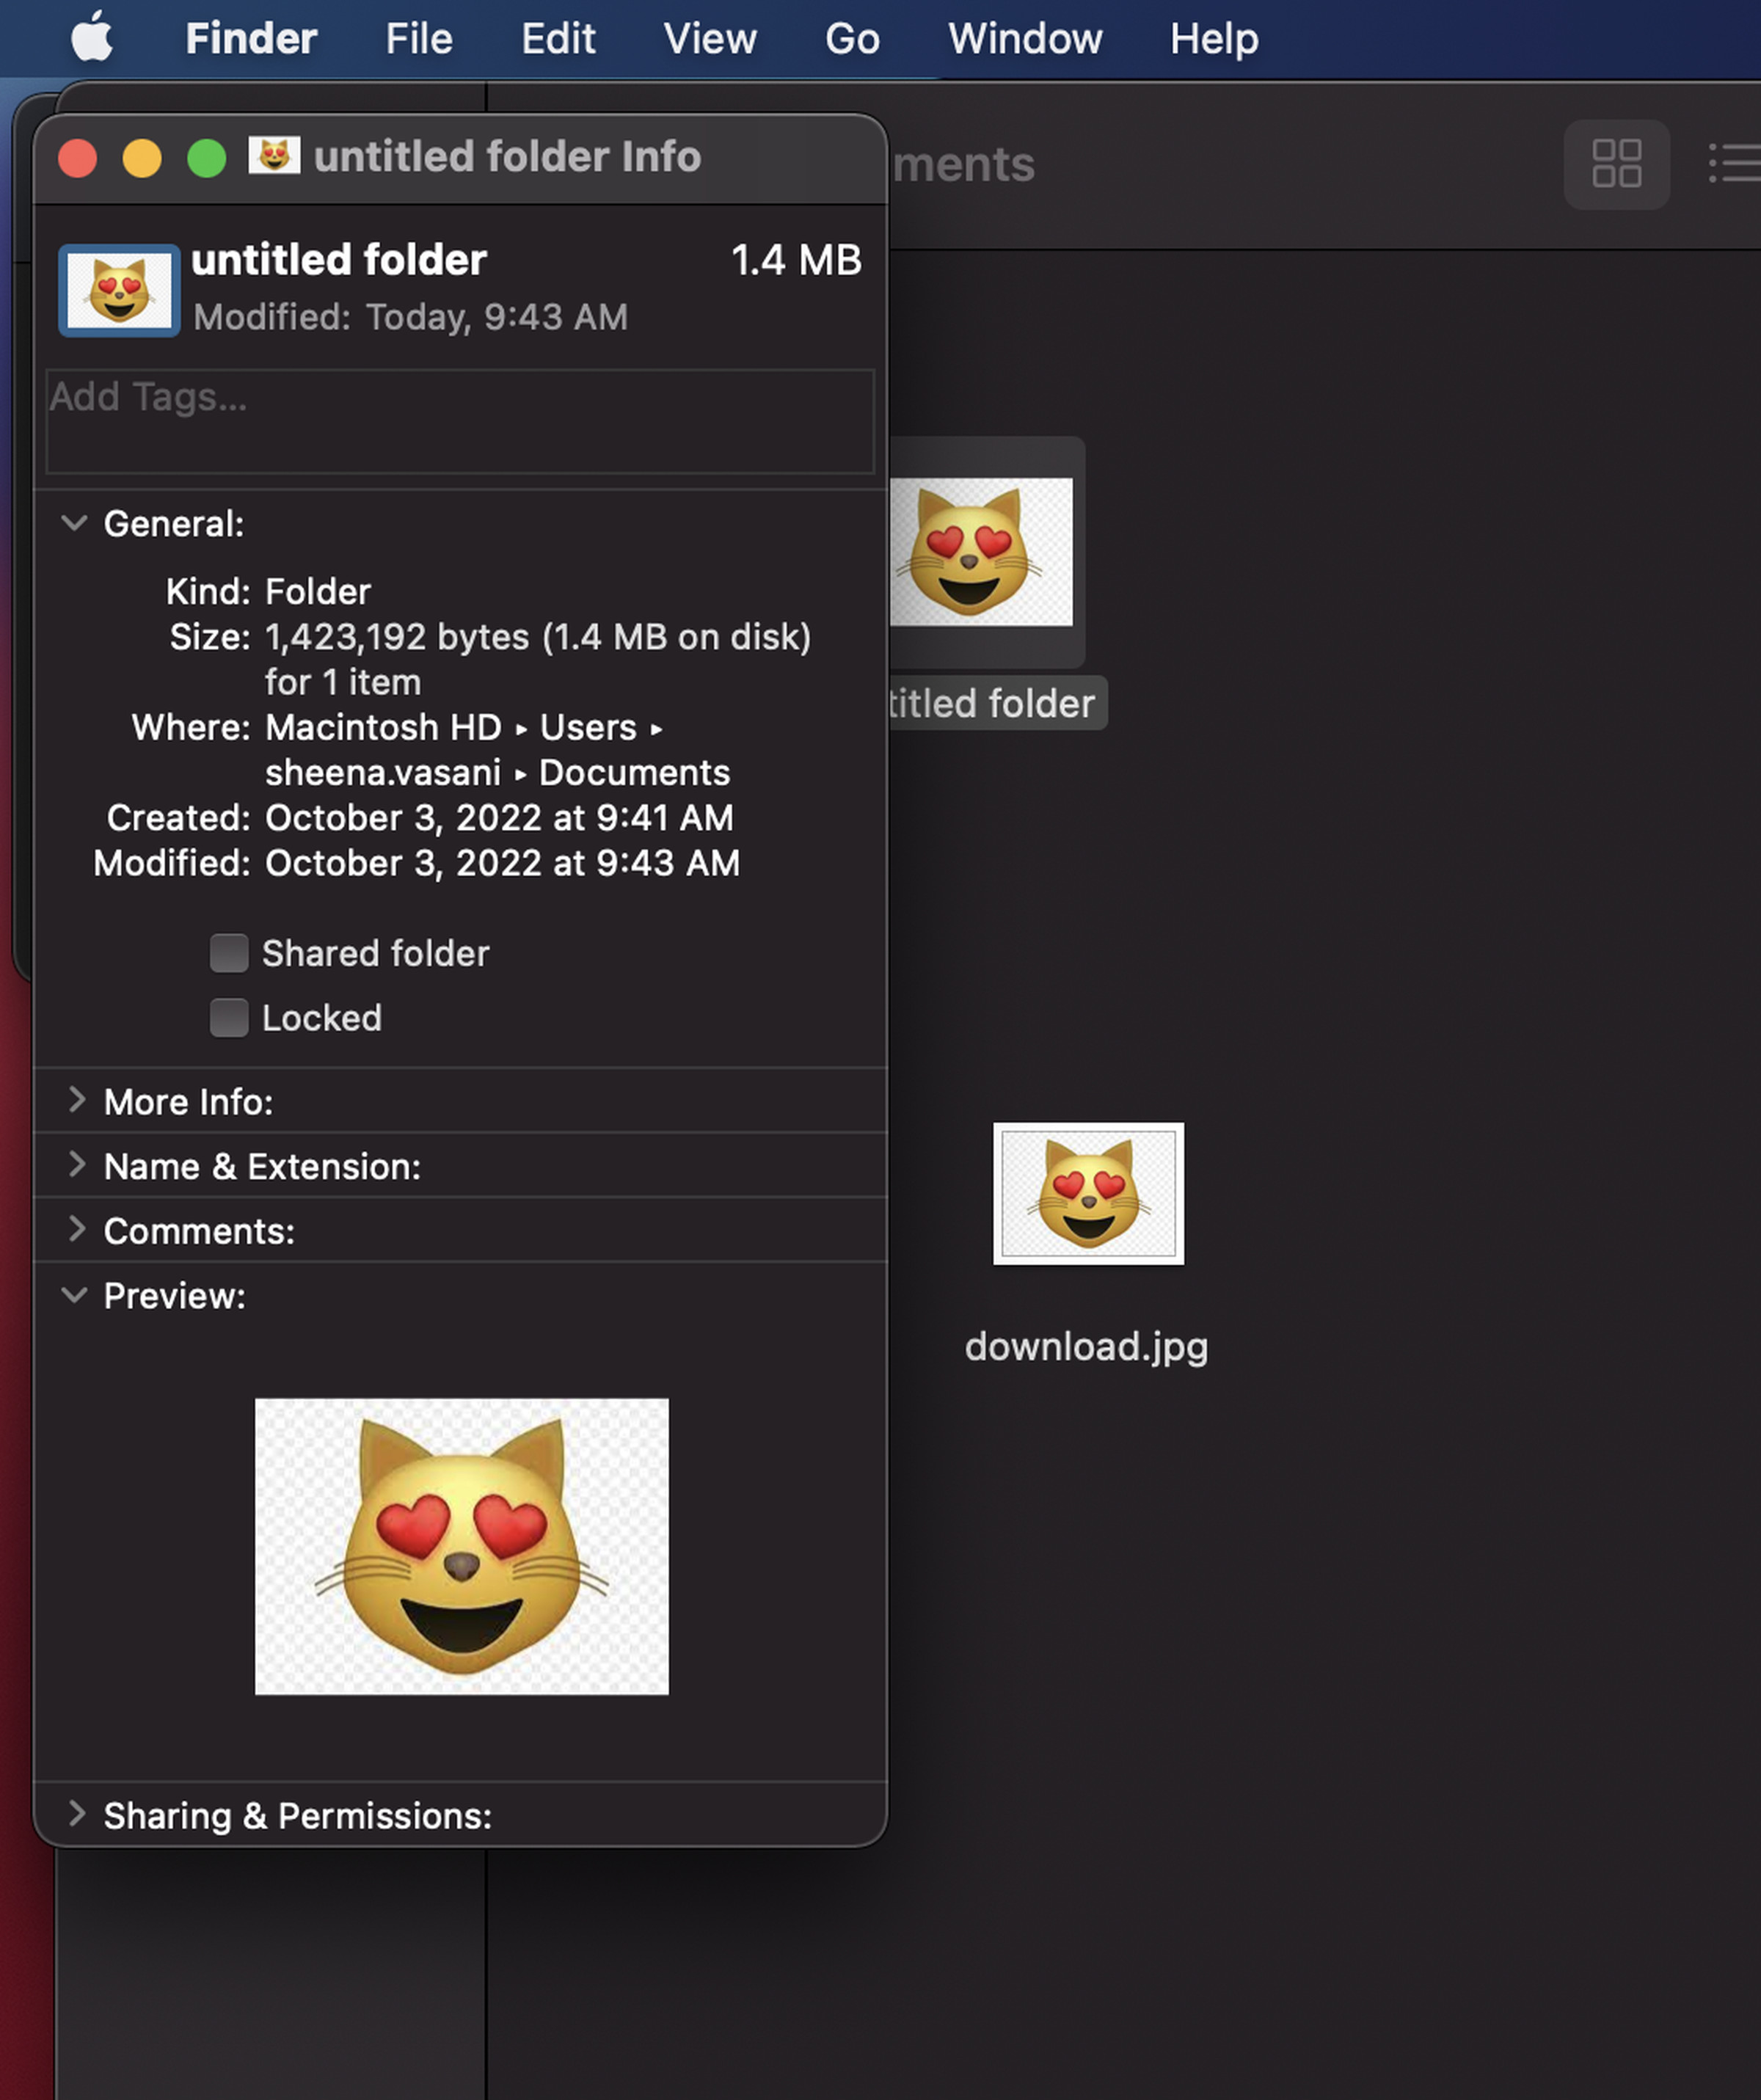 Screenshot of the blue folder now replaced with a cat emoji with hearts for eyes.